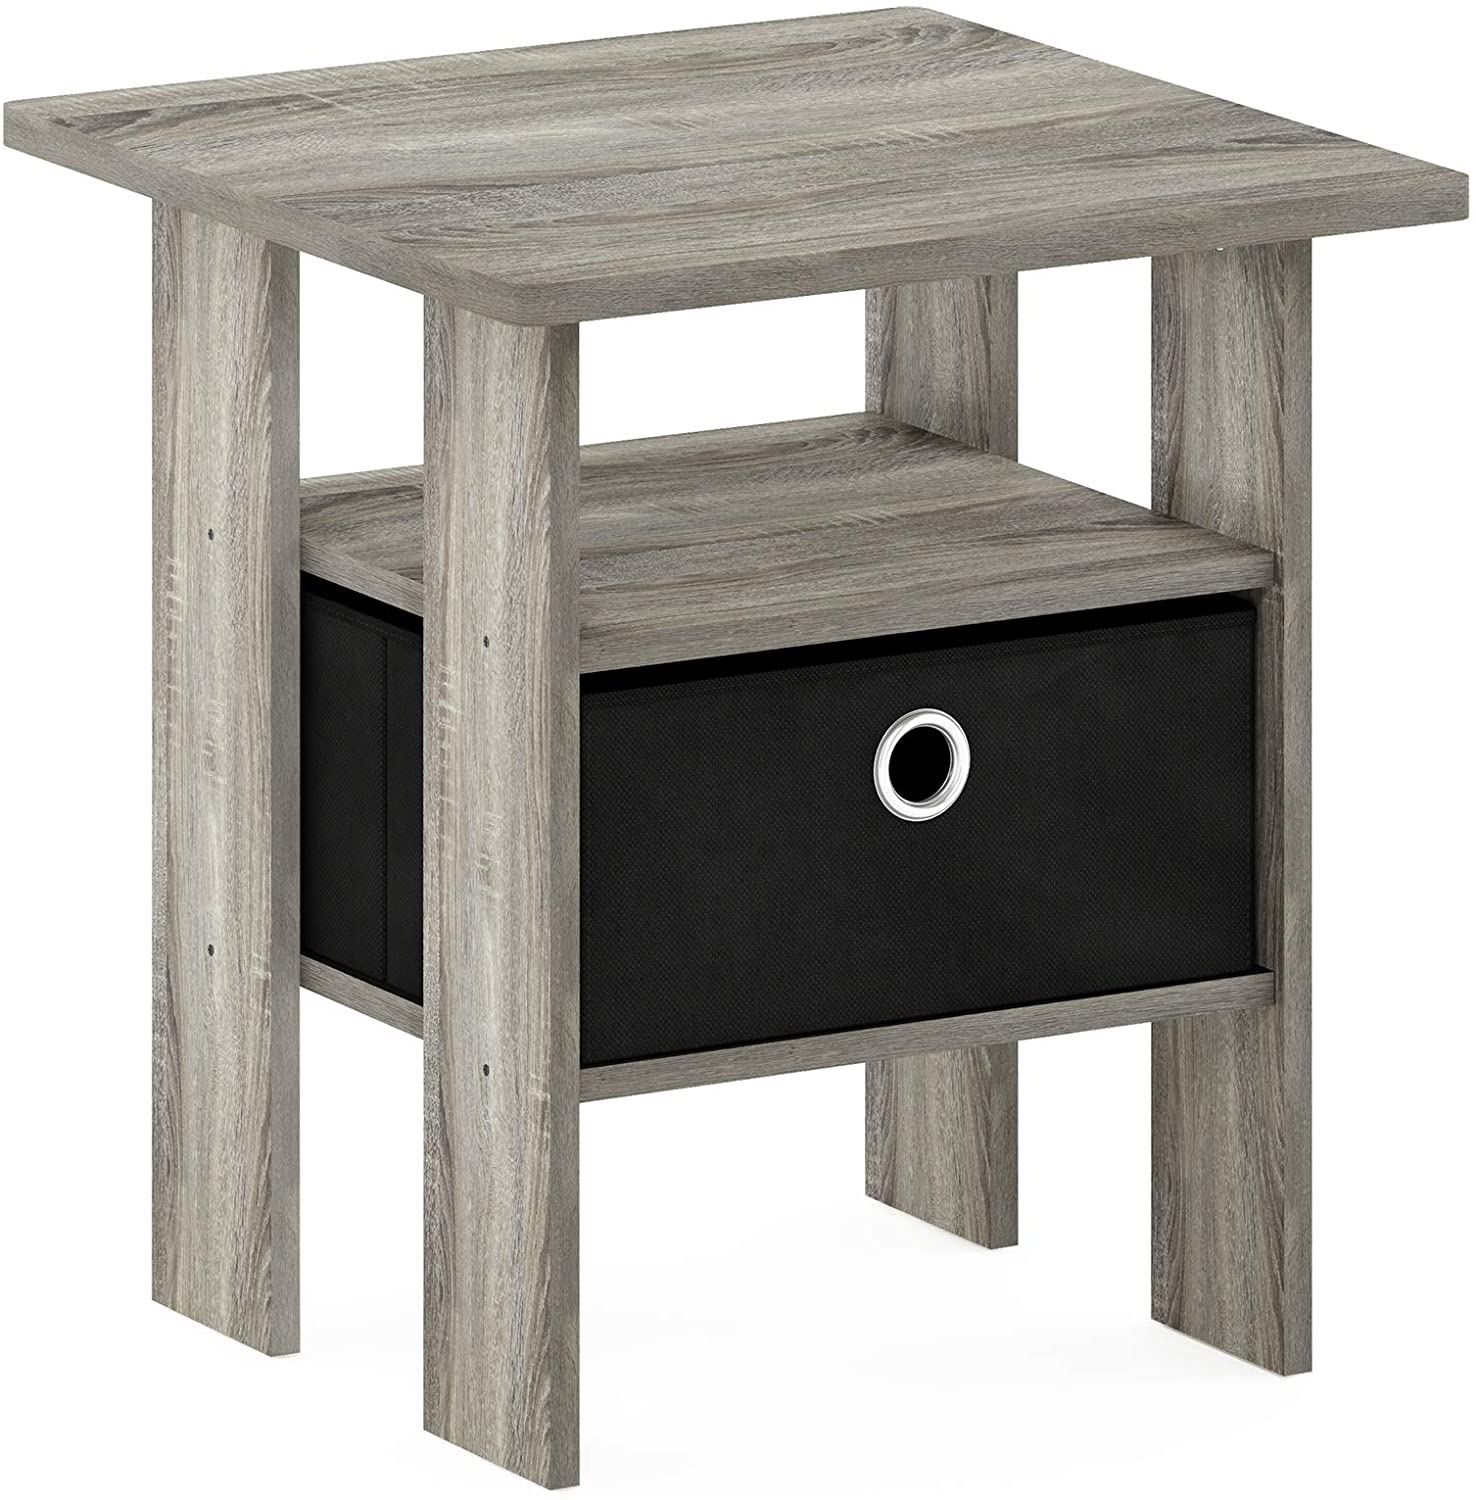 Side Tables : End Table Nightstand with Bin Drawer